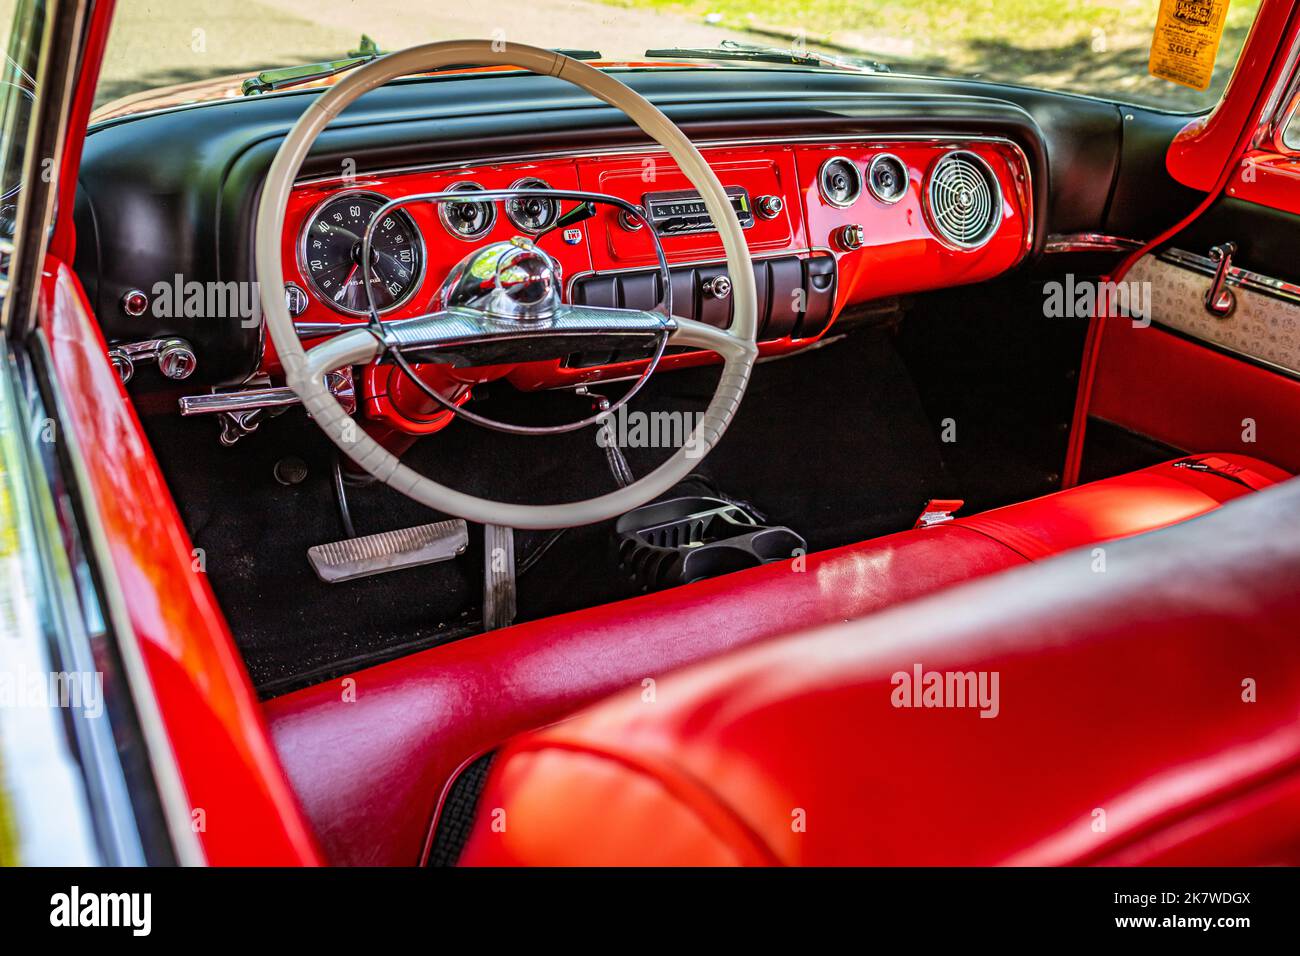 Falcon Heights, MN - June 19, 2022: Wide angle high perspective detail interior view of a 1955 Plymouth Belvedere Convertible at a local car show. Stock Photo